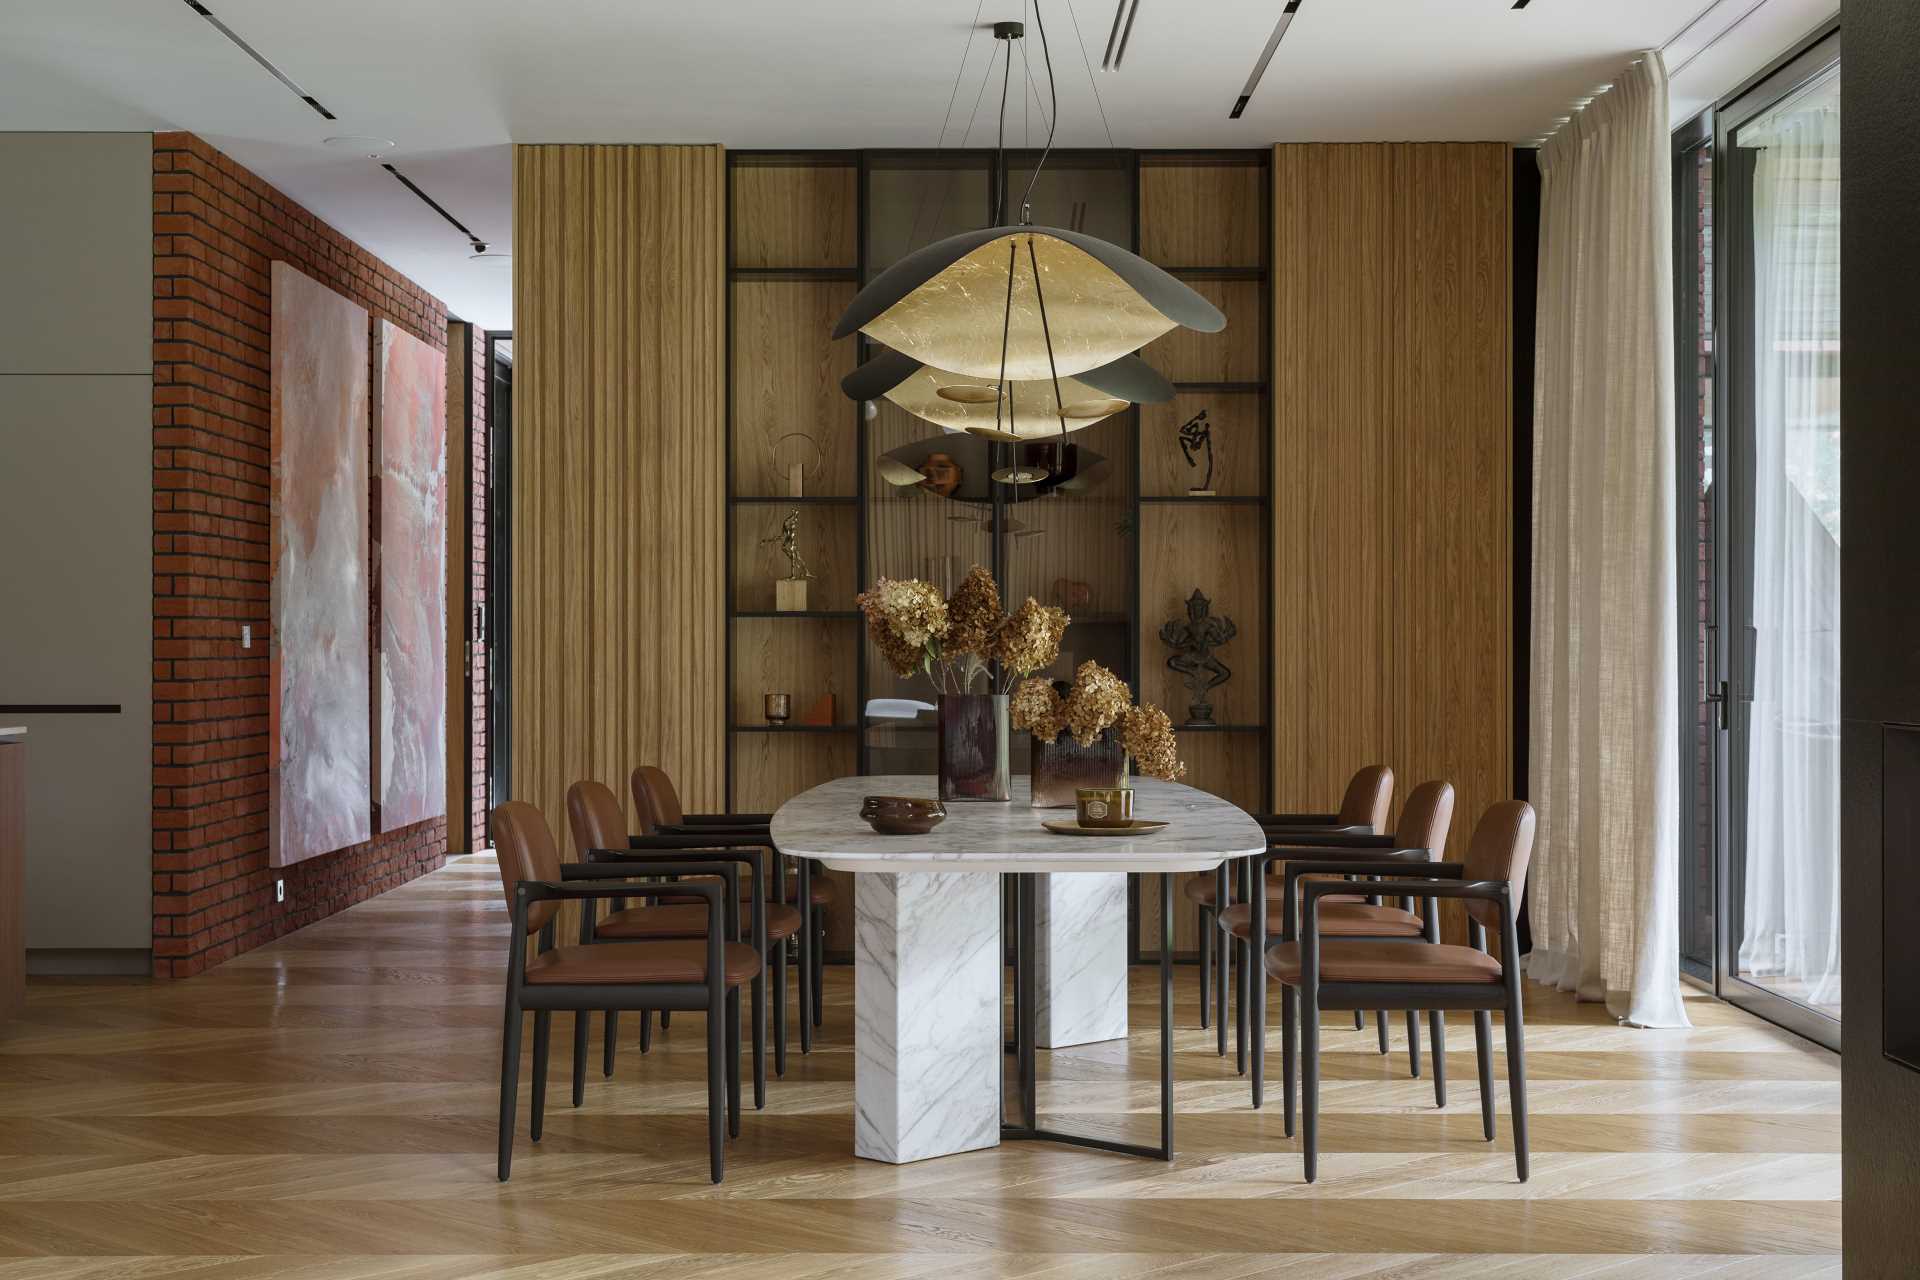 Aged brick, black steel, and corten-color elements appear inside this modern house, like in the dining room.